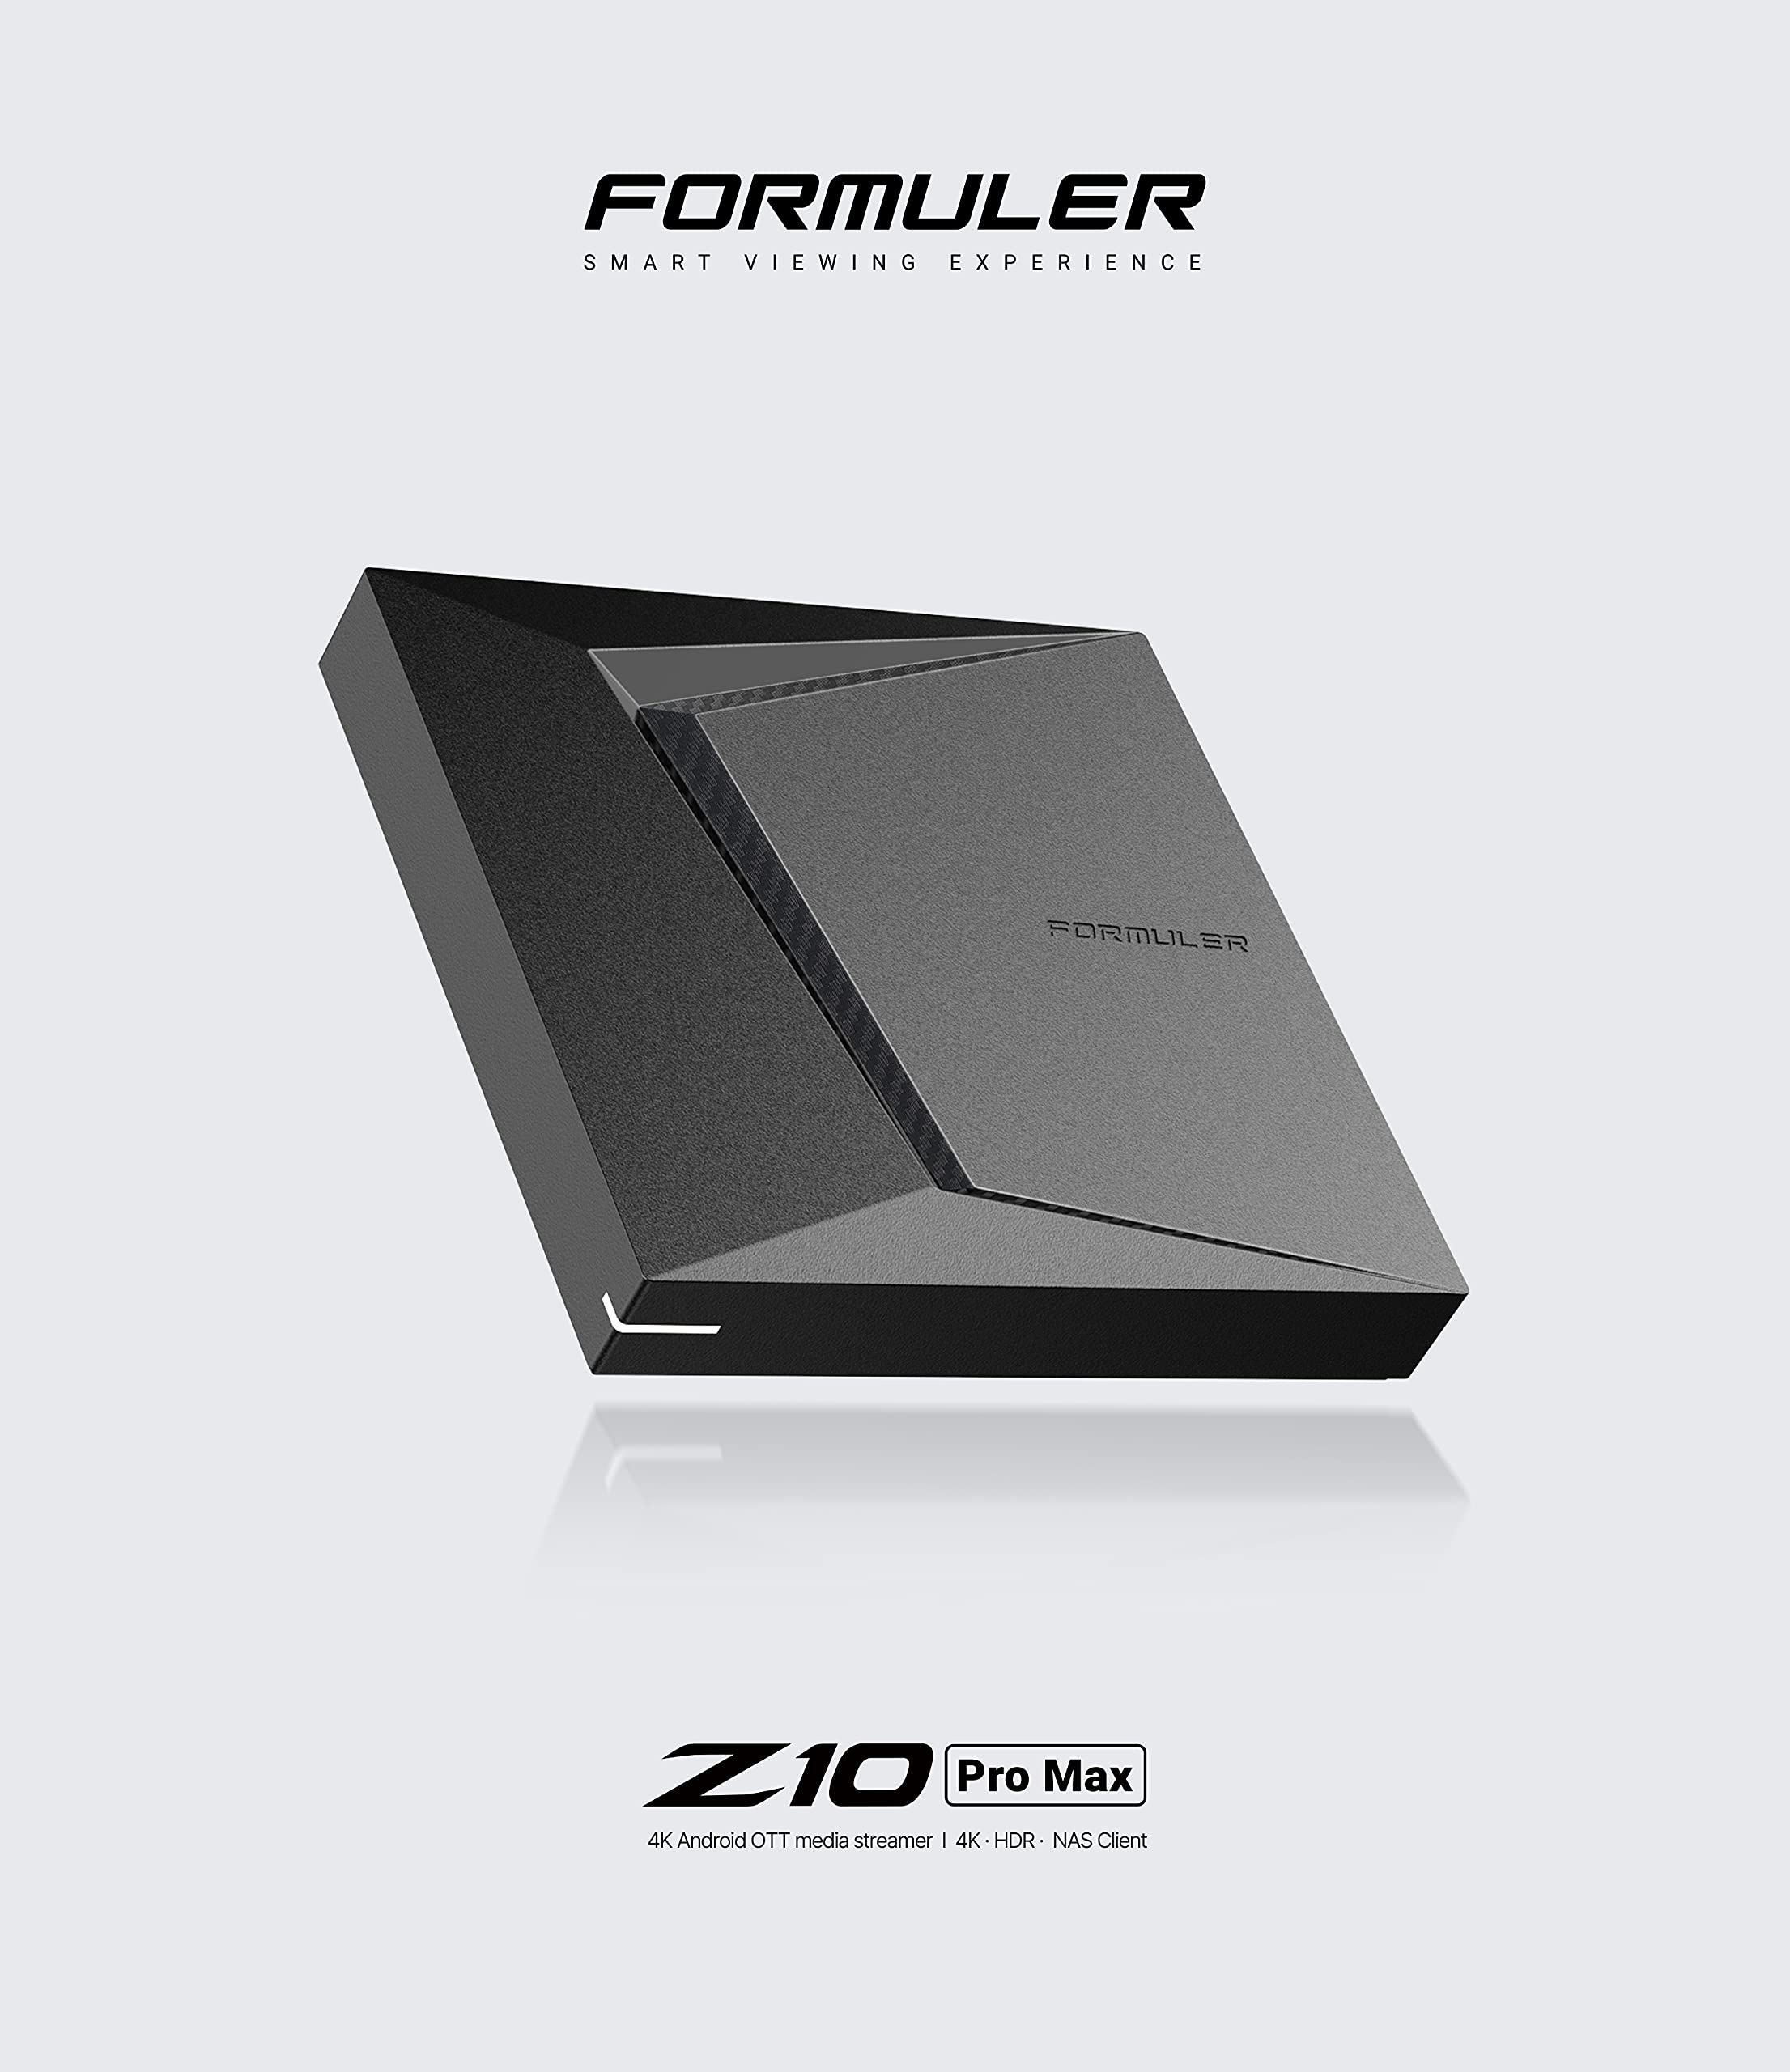 Dreamlink/Formuler Formuler Z10 Pro Max Android 10 Dual Band 5G Gigabit LAN 4GB Ram 32GB ROM 4K + Extra 8K HDMI Cable + Extra Premium Remote Control + Extra Magnetic Phone Car Mount